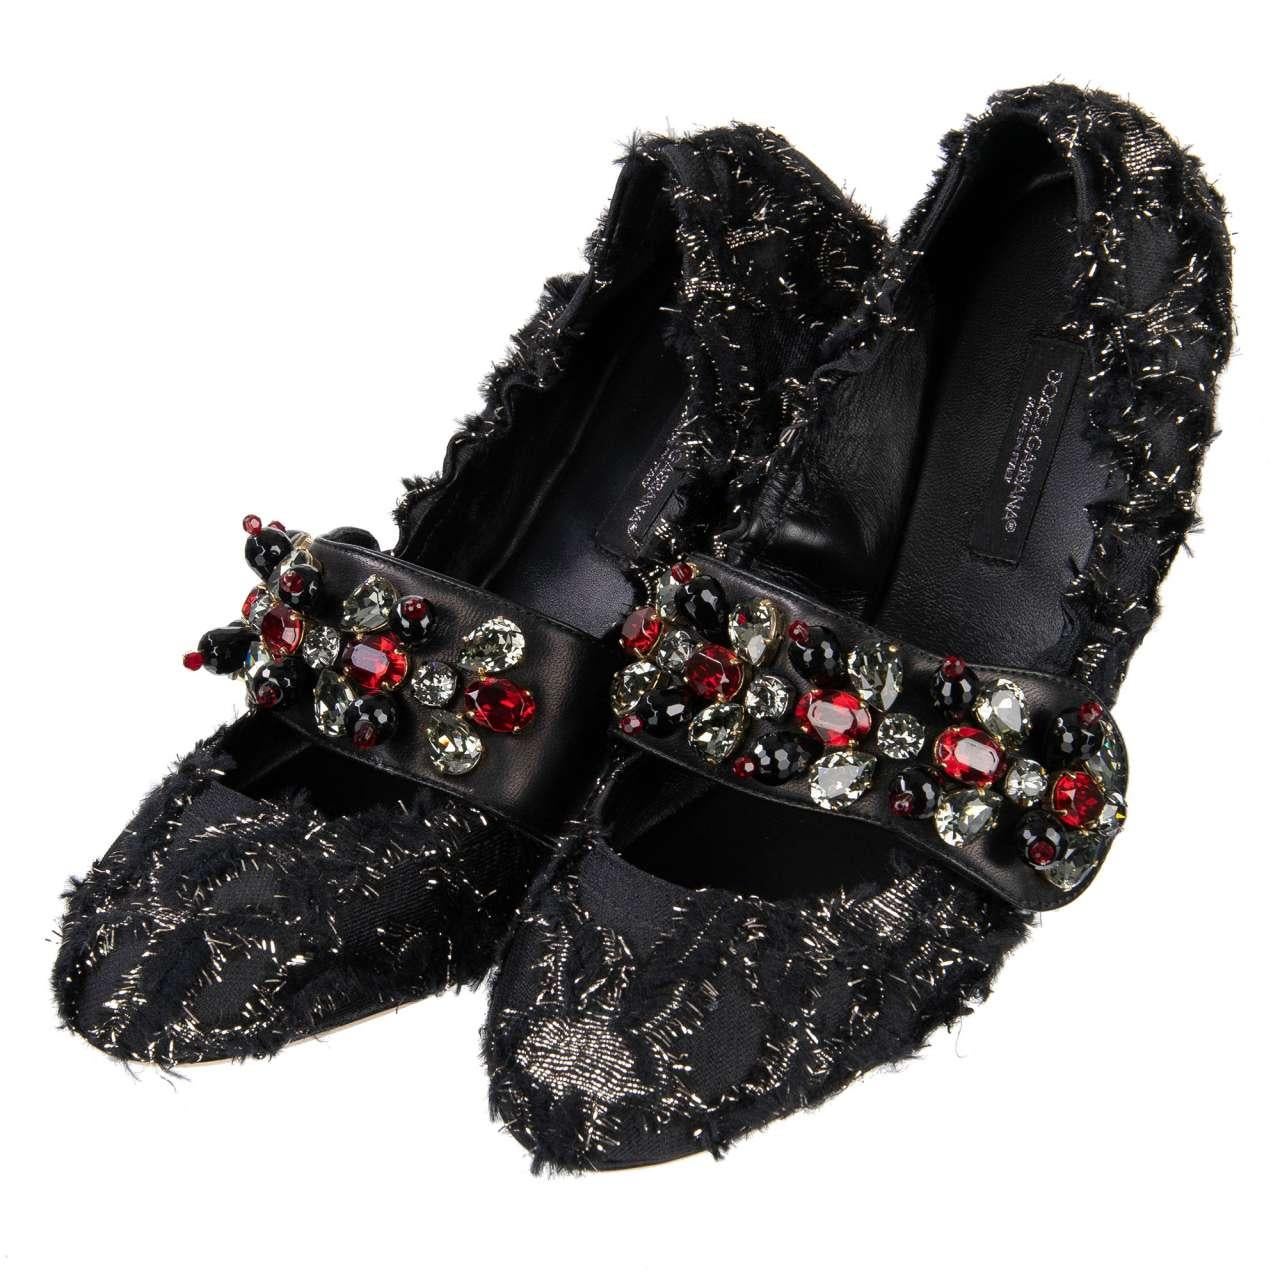 Dolce & Gabbana - Brocade Ballet Flats VALLY with Crystals EUR 38 In Excellent Condition For Sale In Erkrath, DE